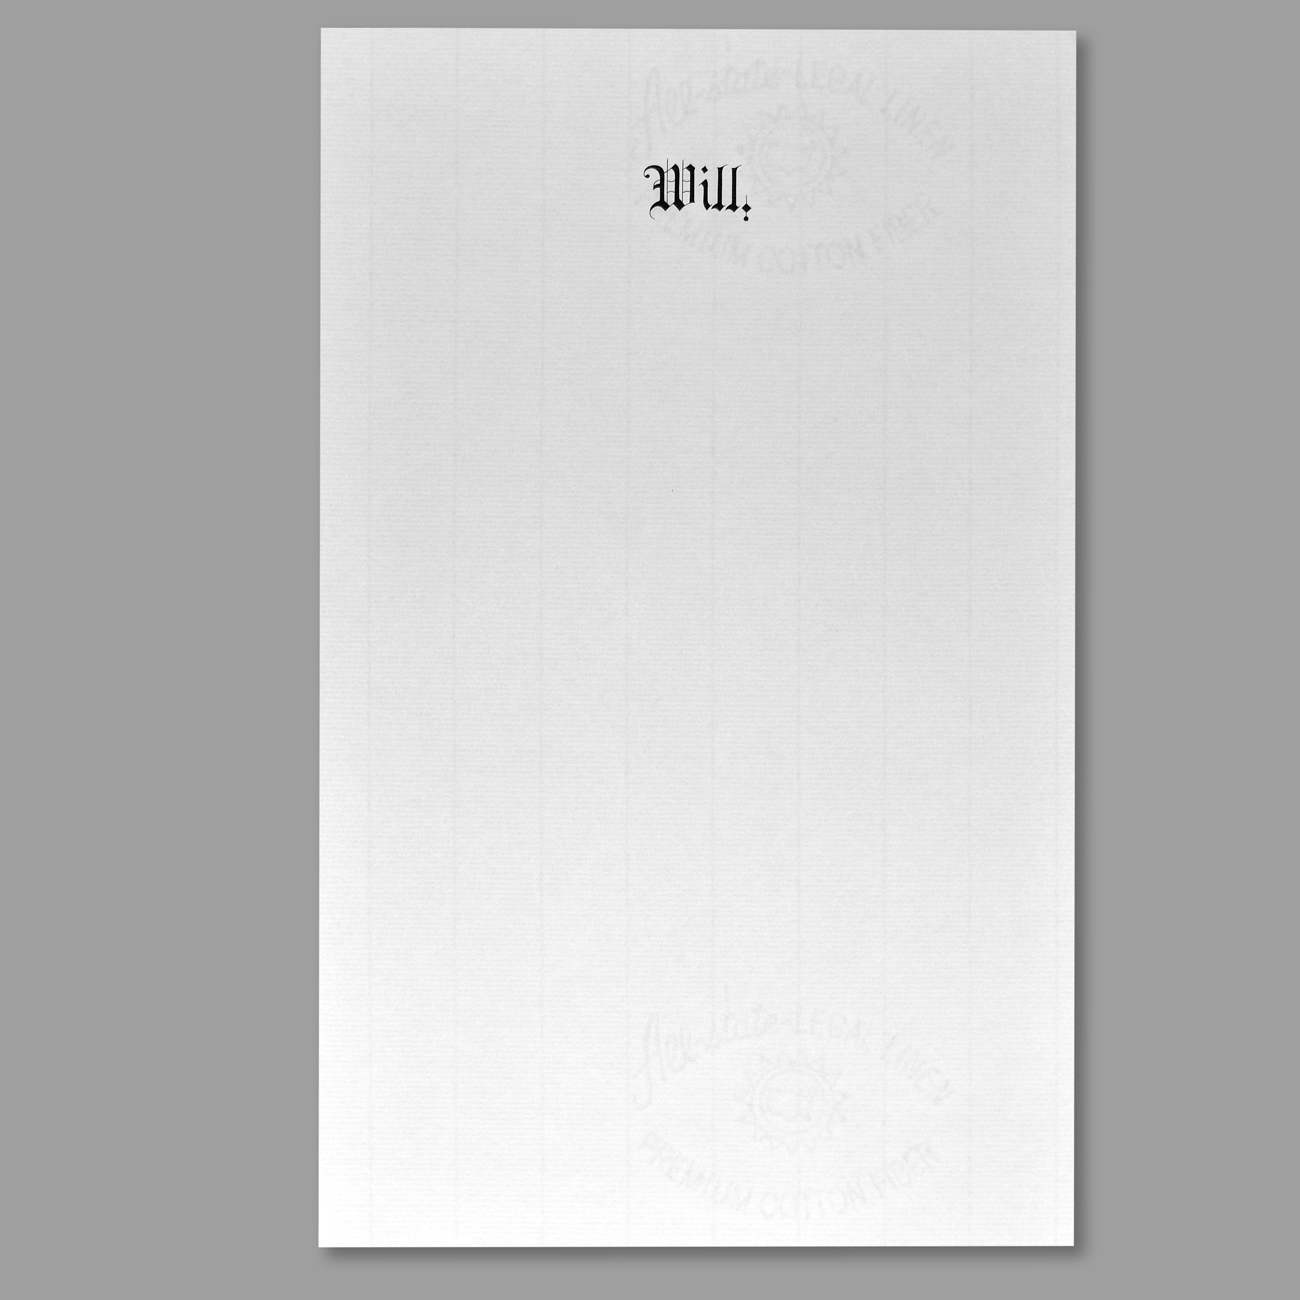 Will First Pages, Style 601/602 Style 601/602, Legal Size, Will First Page, Engraved "Will,", Natural Laid Stock, 25% Cotton, 50/PK